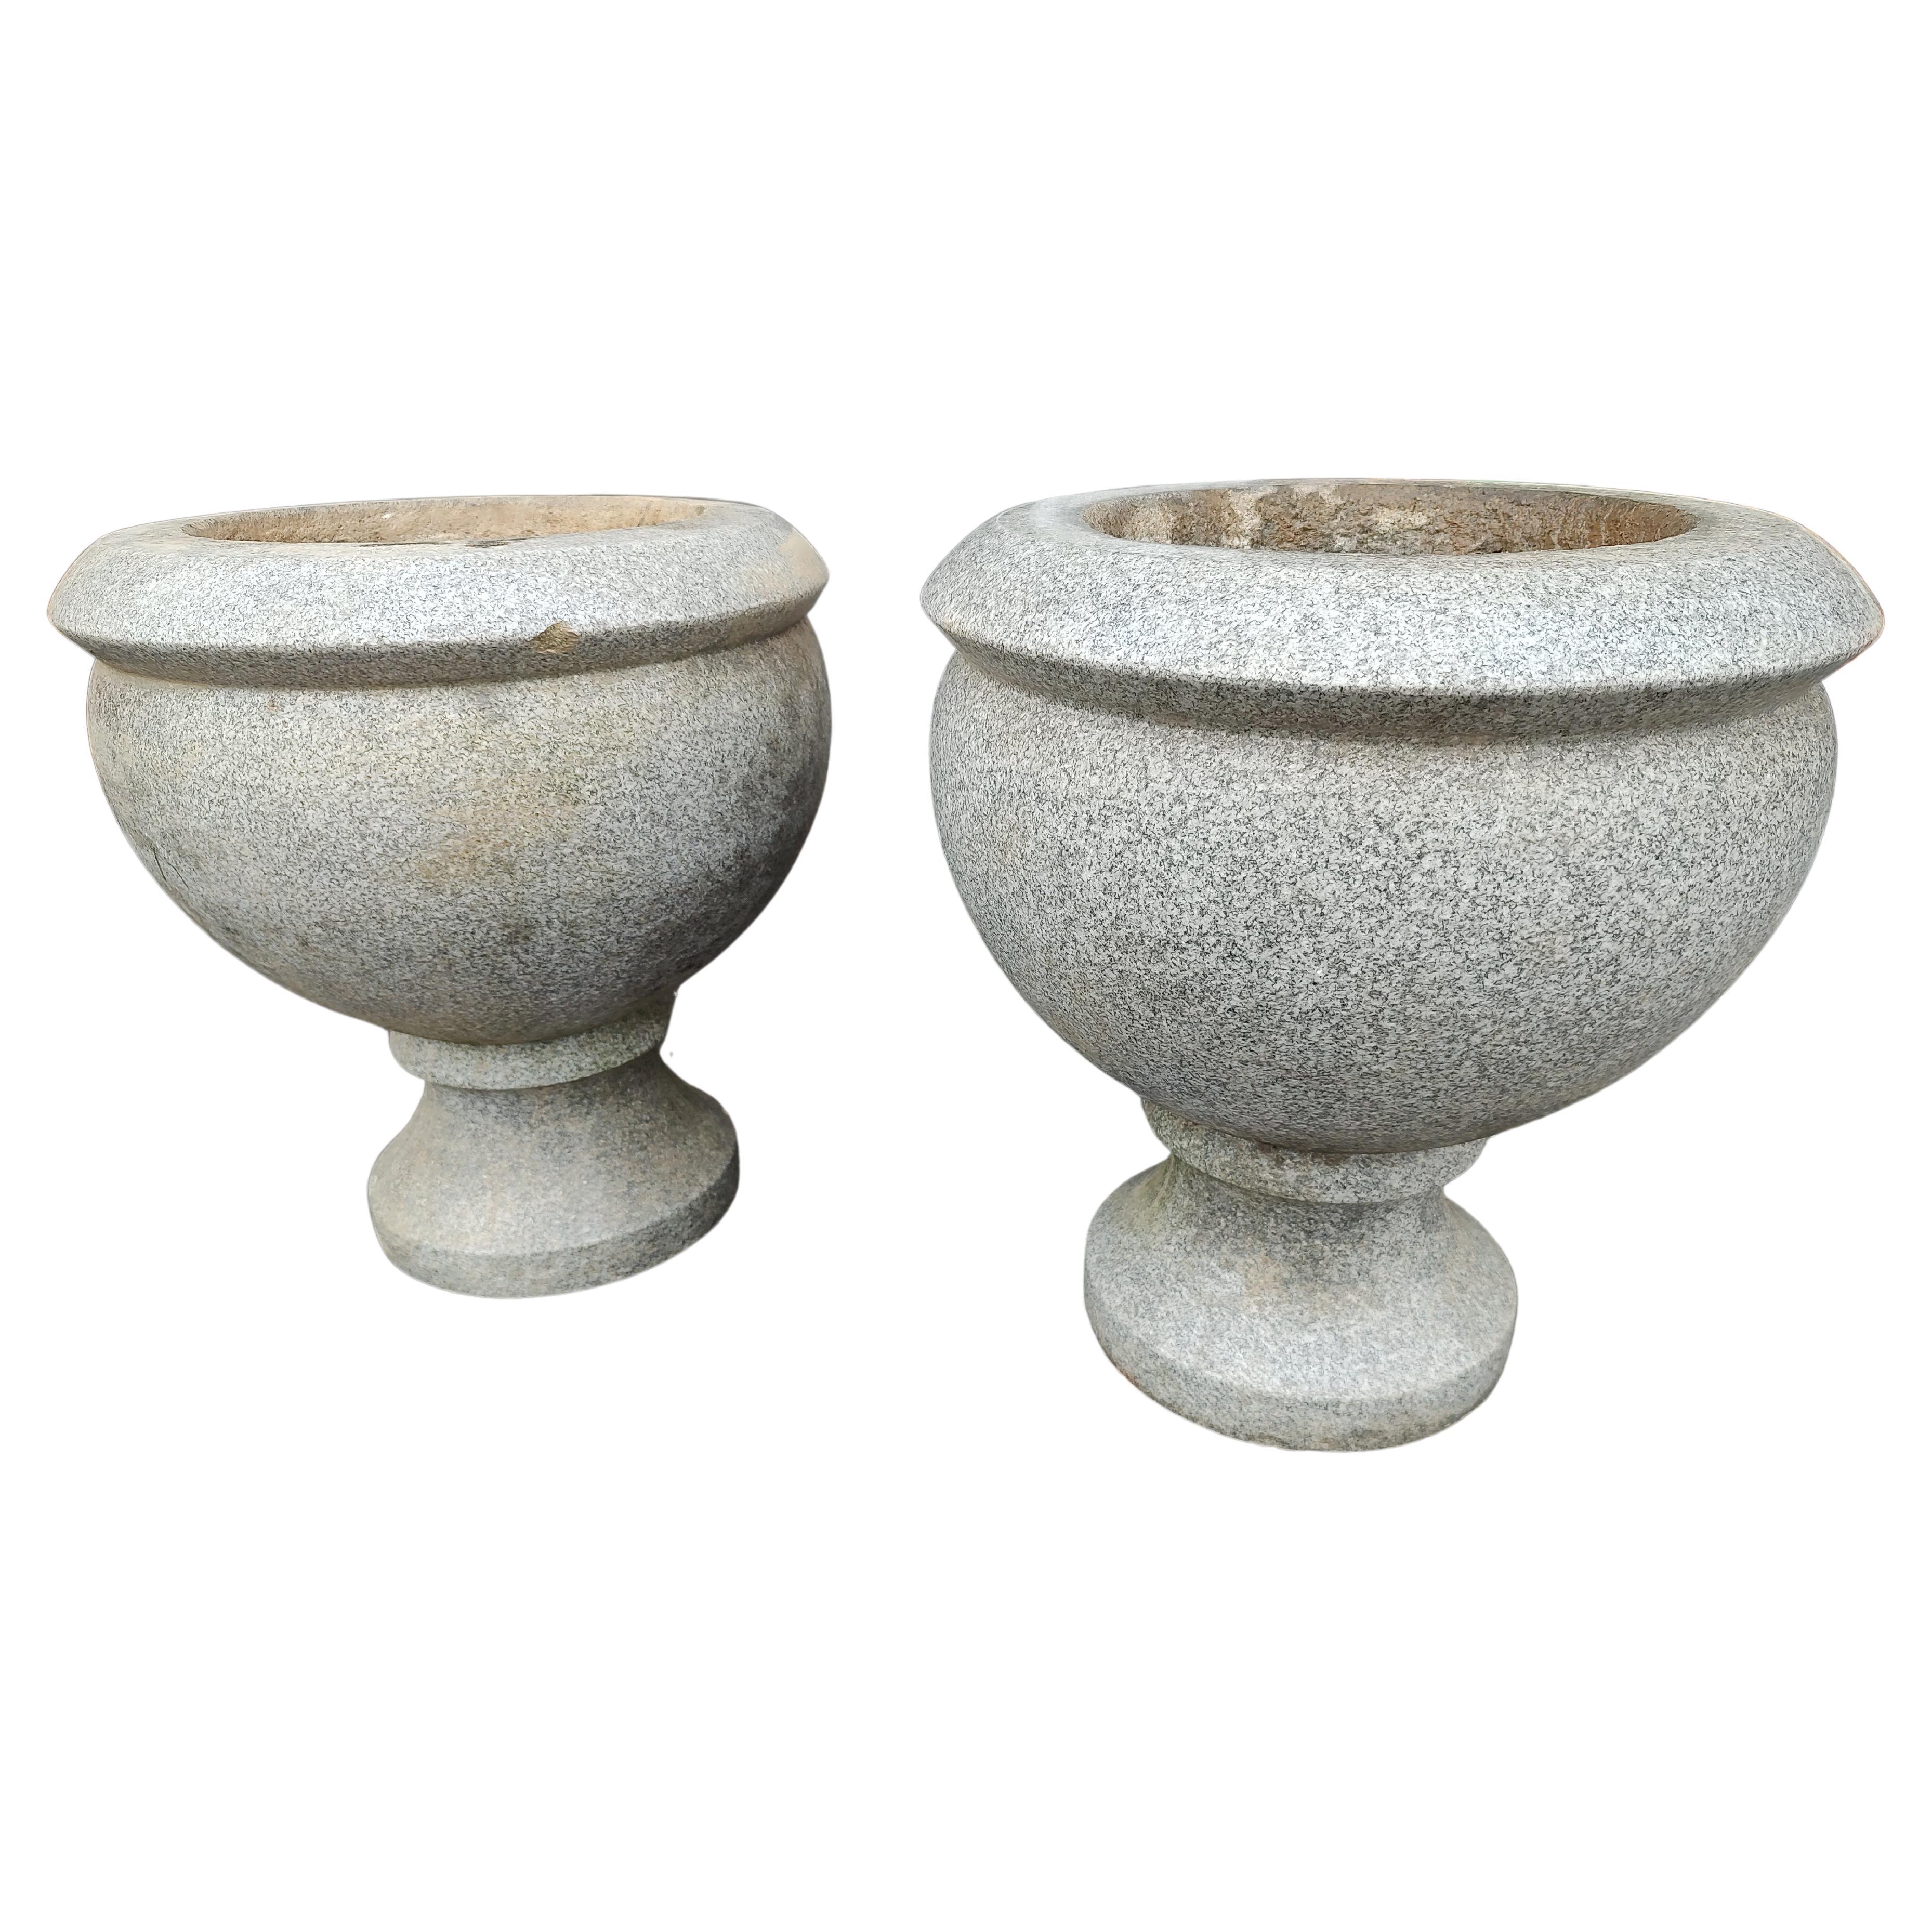 Pair of Early 20th Century Hand Chiseled & Polished Granite Garden Urns Planters For Sale 1